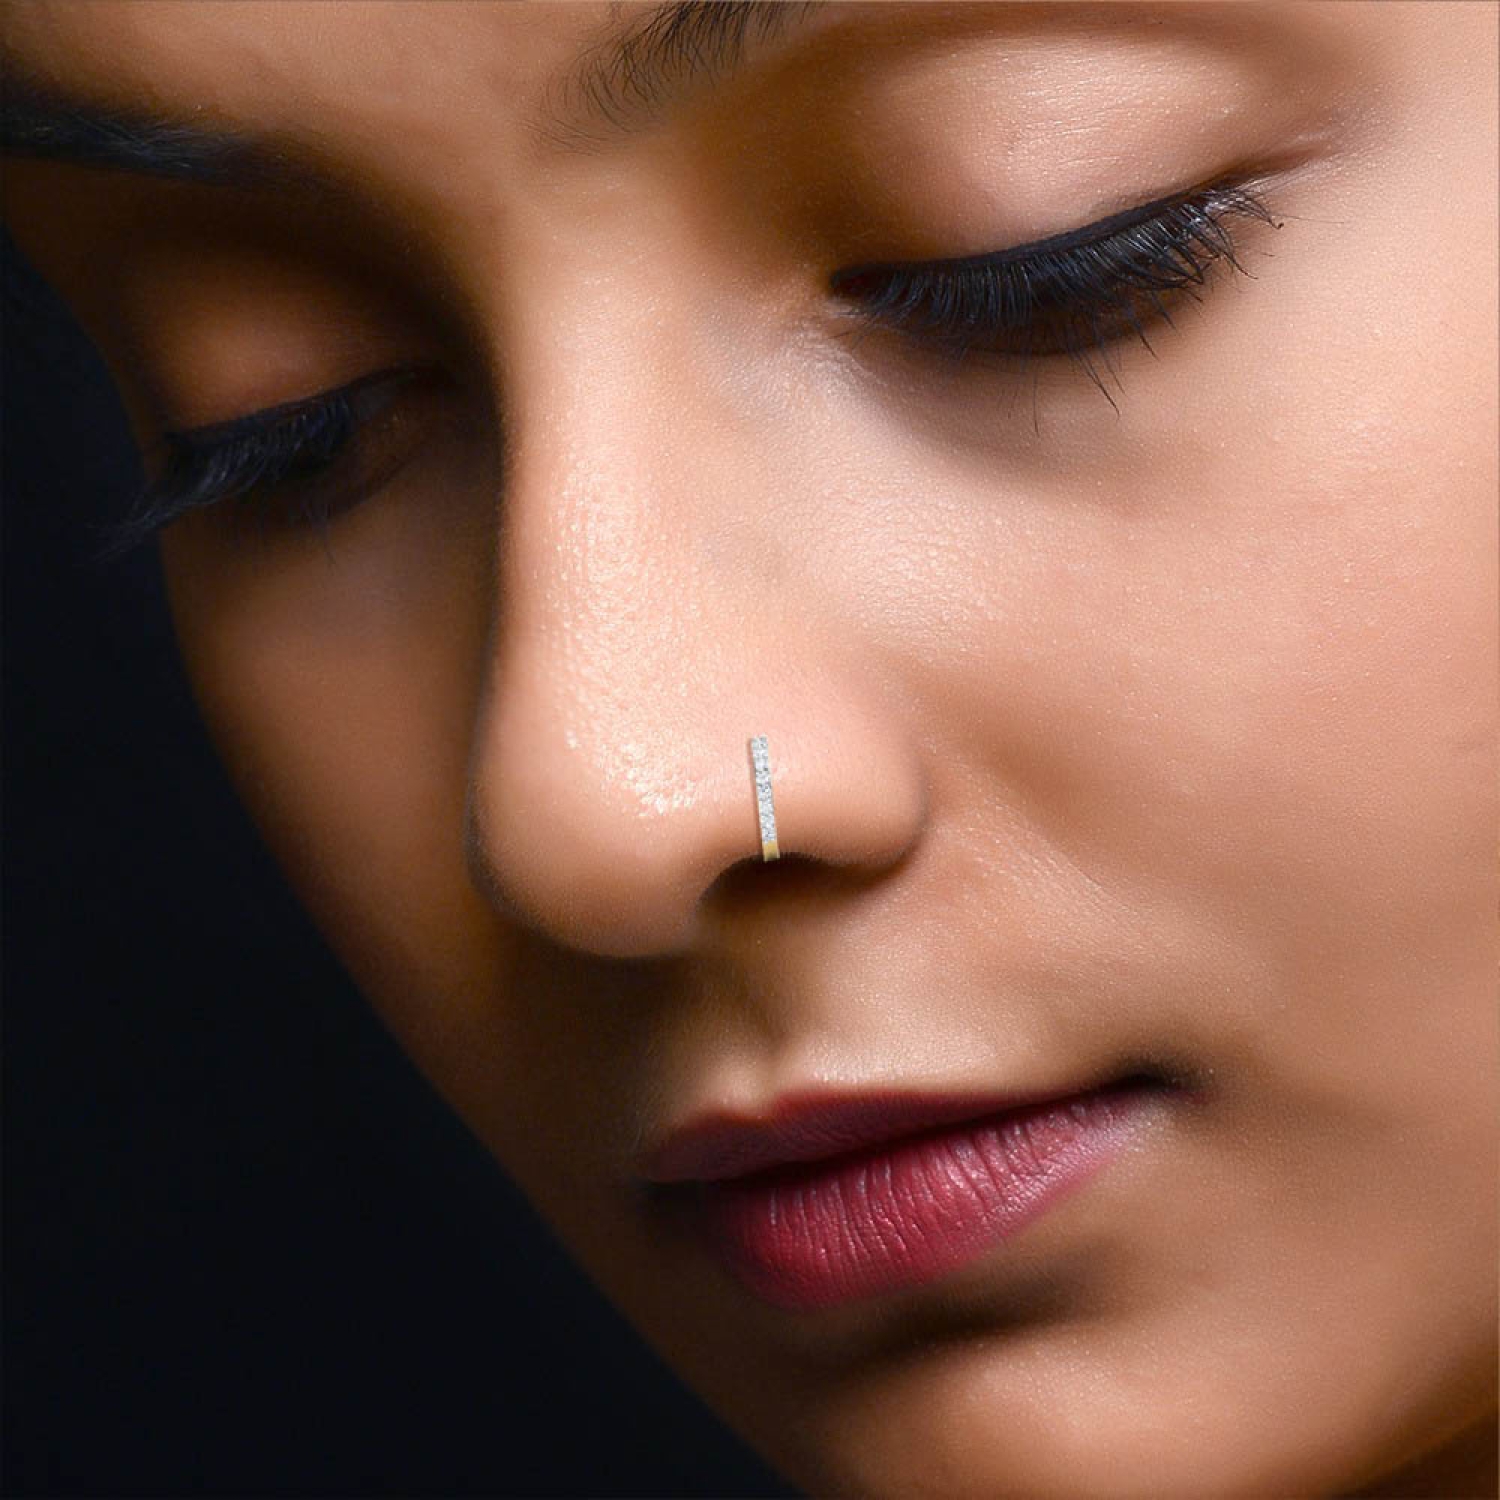 Dropship 40Pcs 20G Nose Rings Stud L Screw Bone Shaped Stainless Nose Rings  Hoop Rainbow Nose Piercing For Women Men to Sell Online at a Lower Price |  Doba